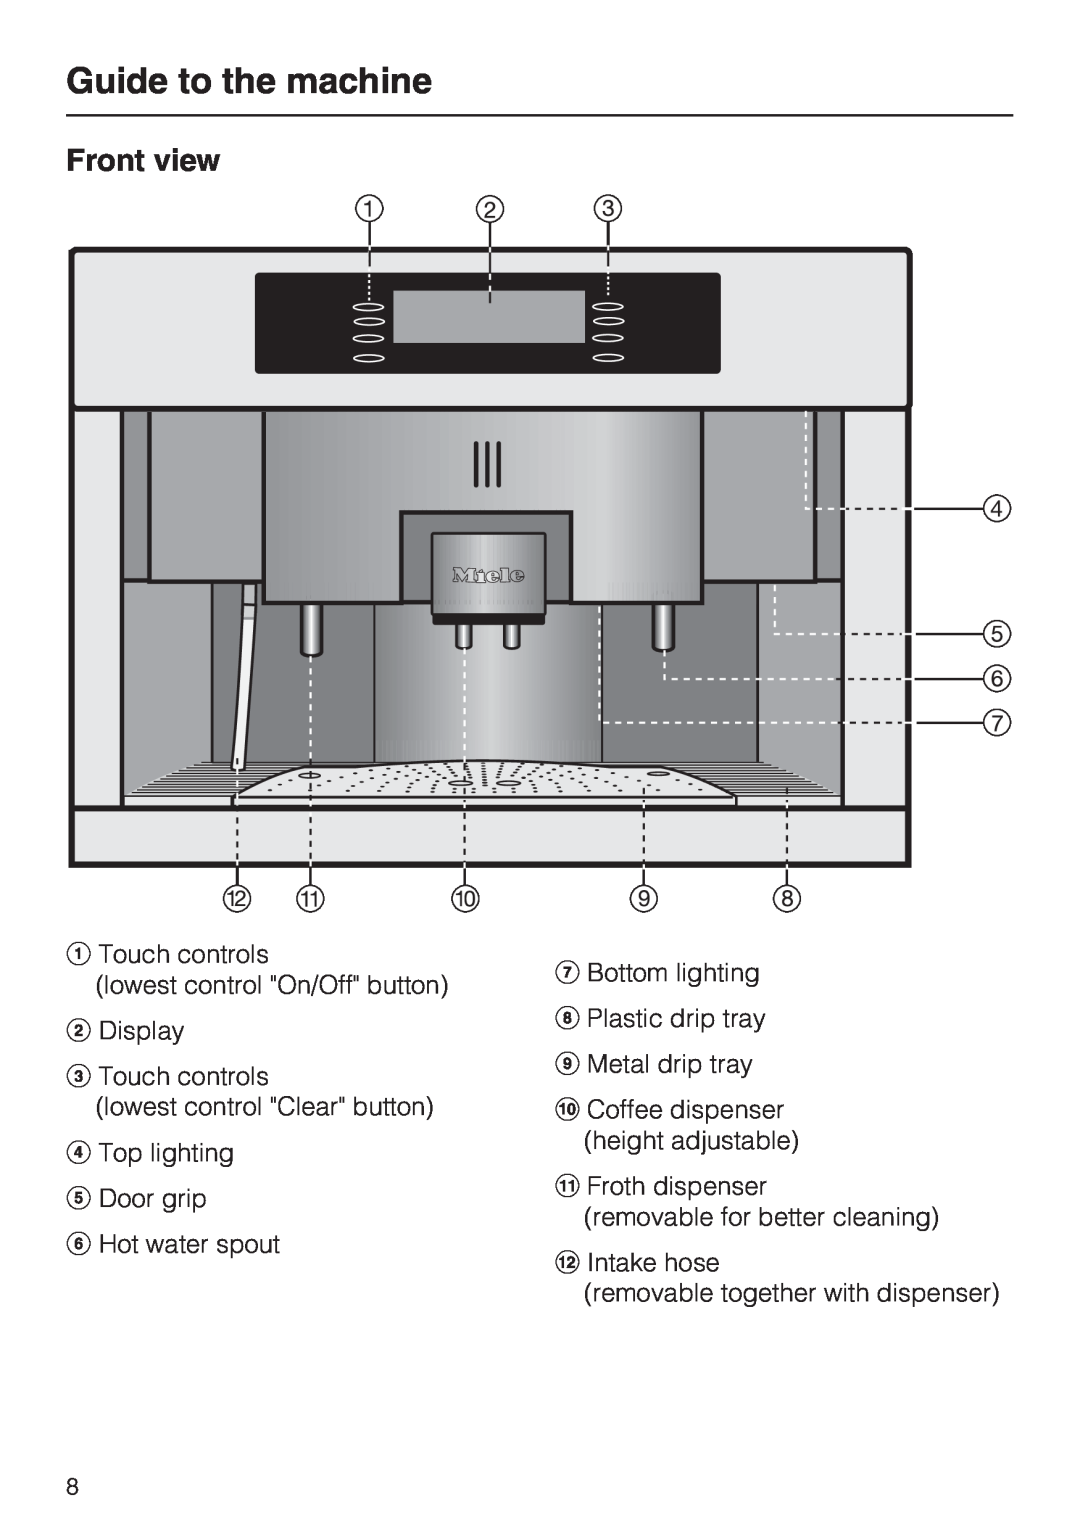 Miele CVA4075 installation instructions Guide to the machine, Front view 